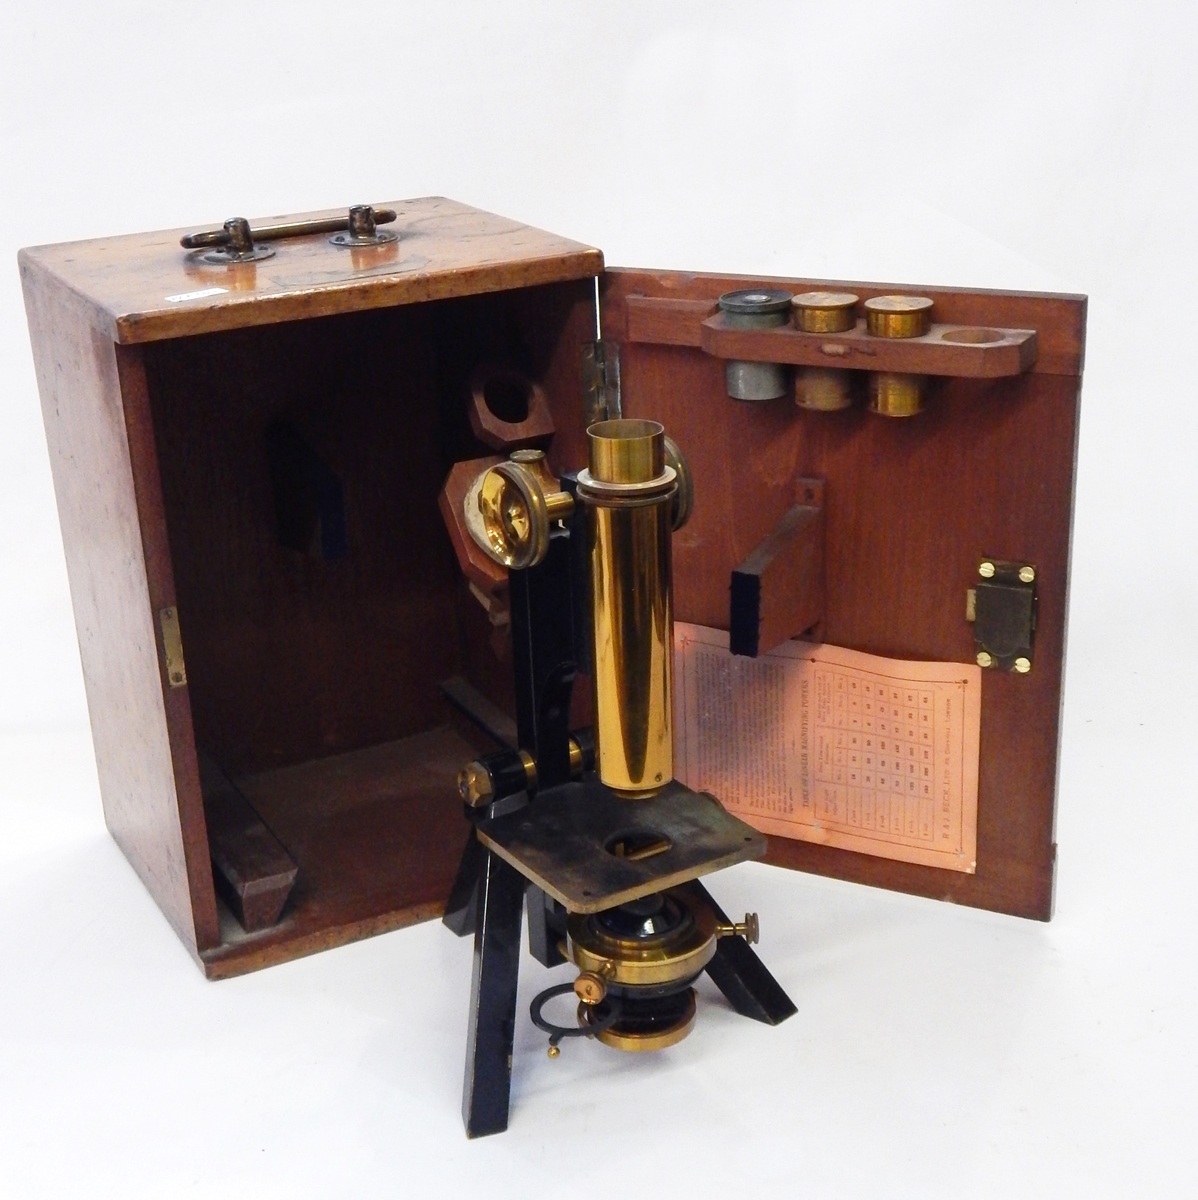 R & J Beck Limited, London microscope, serial number 21771,